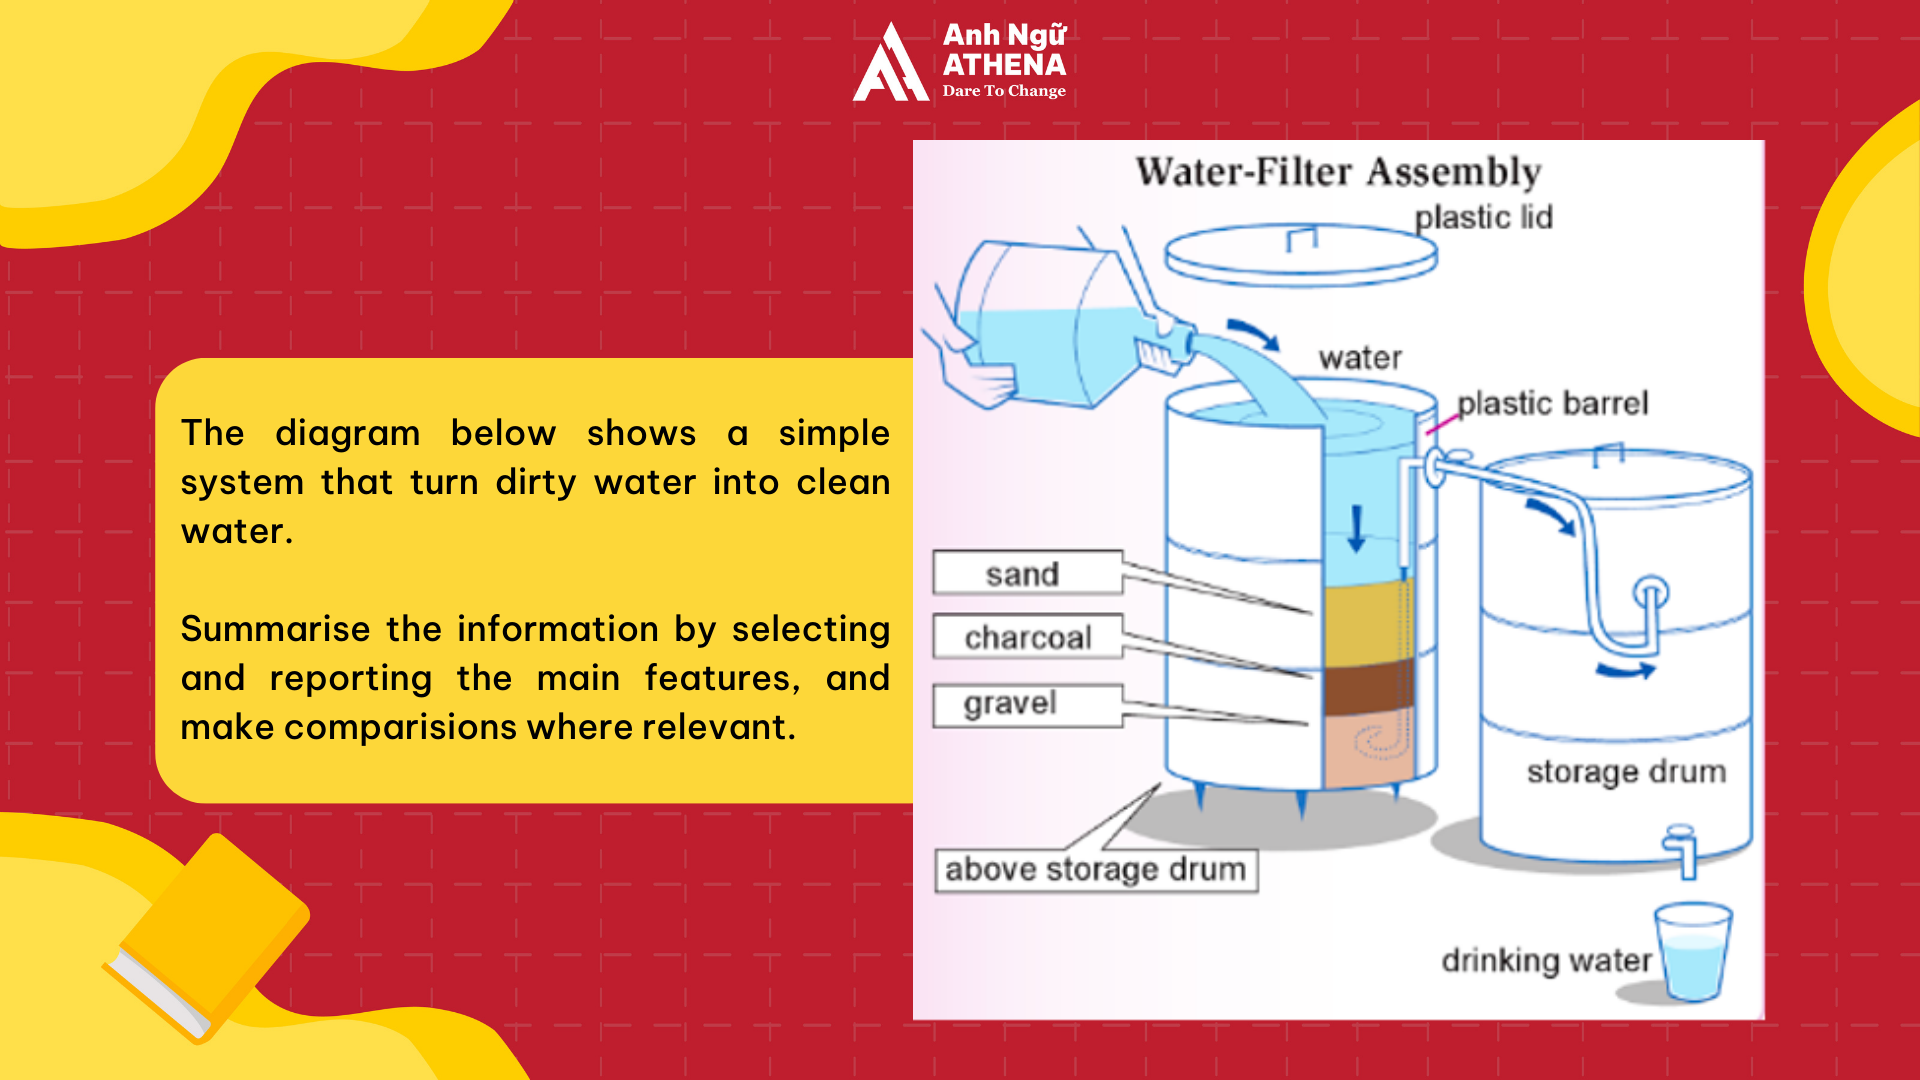  The diagram below shows a simple system that turn dirty water into clean water. Summarise the information by selecting and reporting the main features, and make comparisions where relevant.